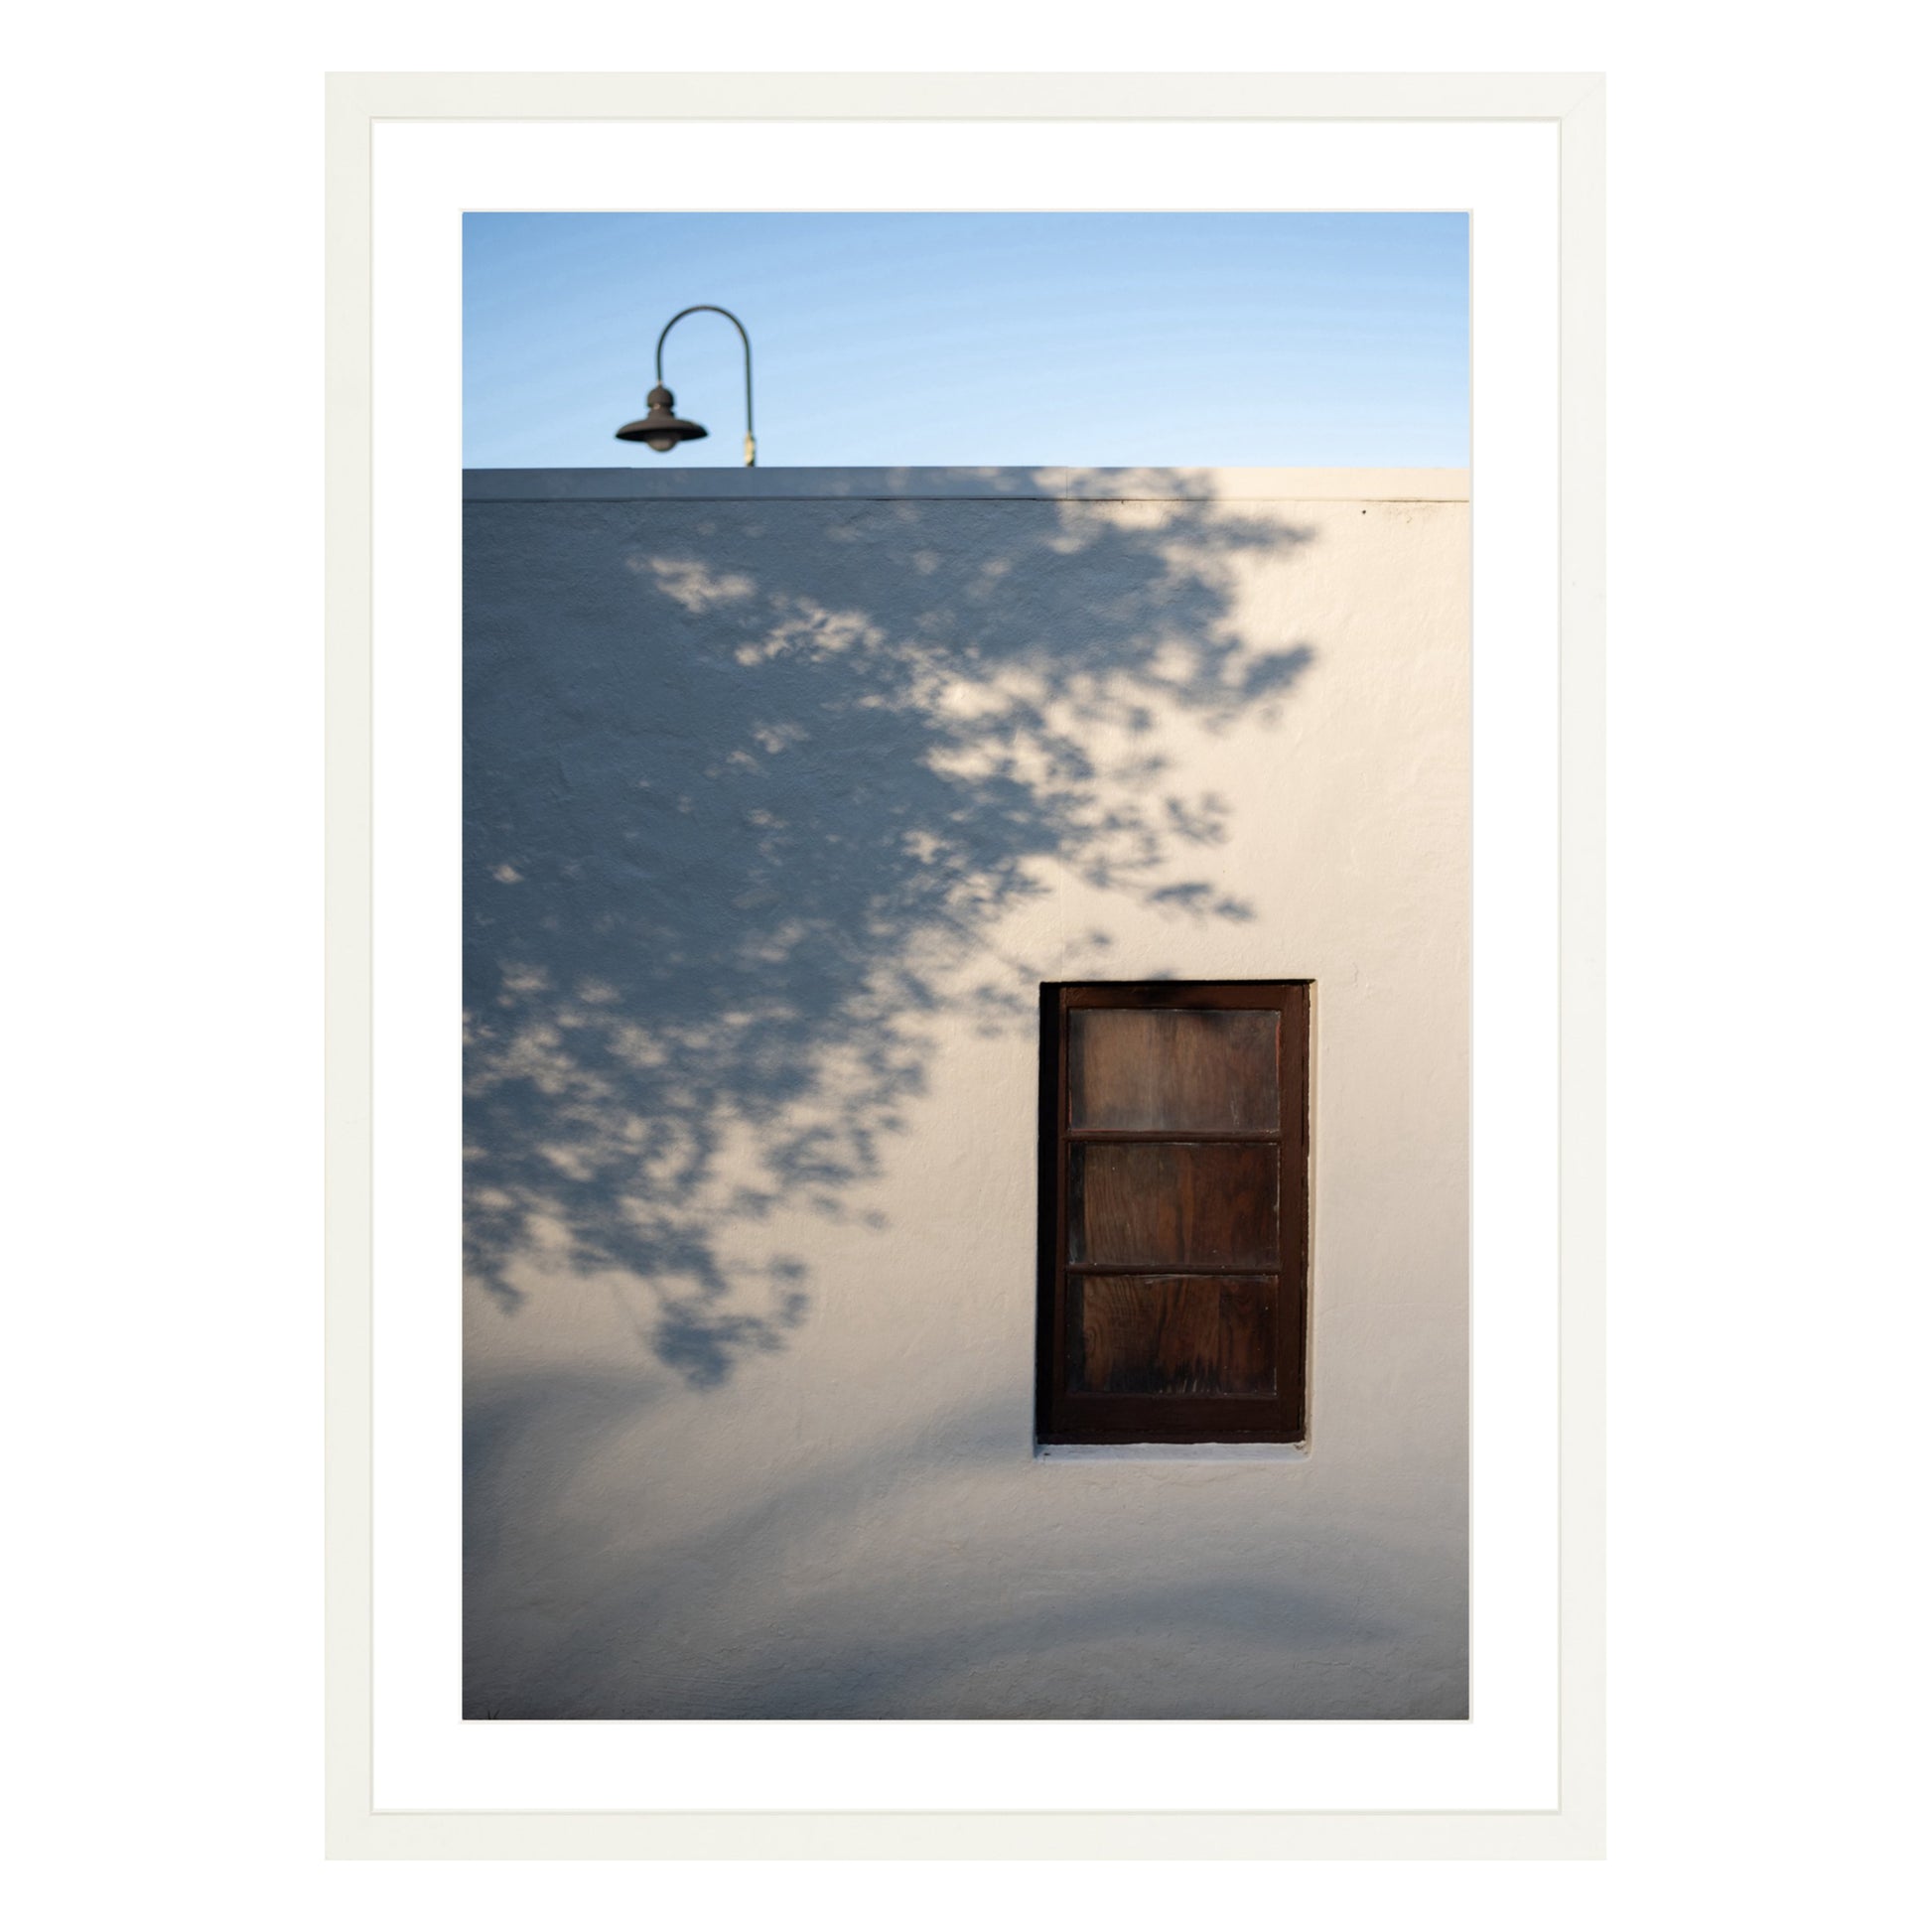 Photograph of shadows on building in San Francisco Presidio in white frame with white mat